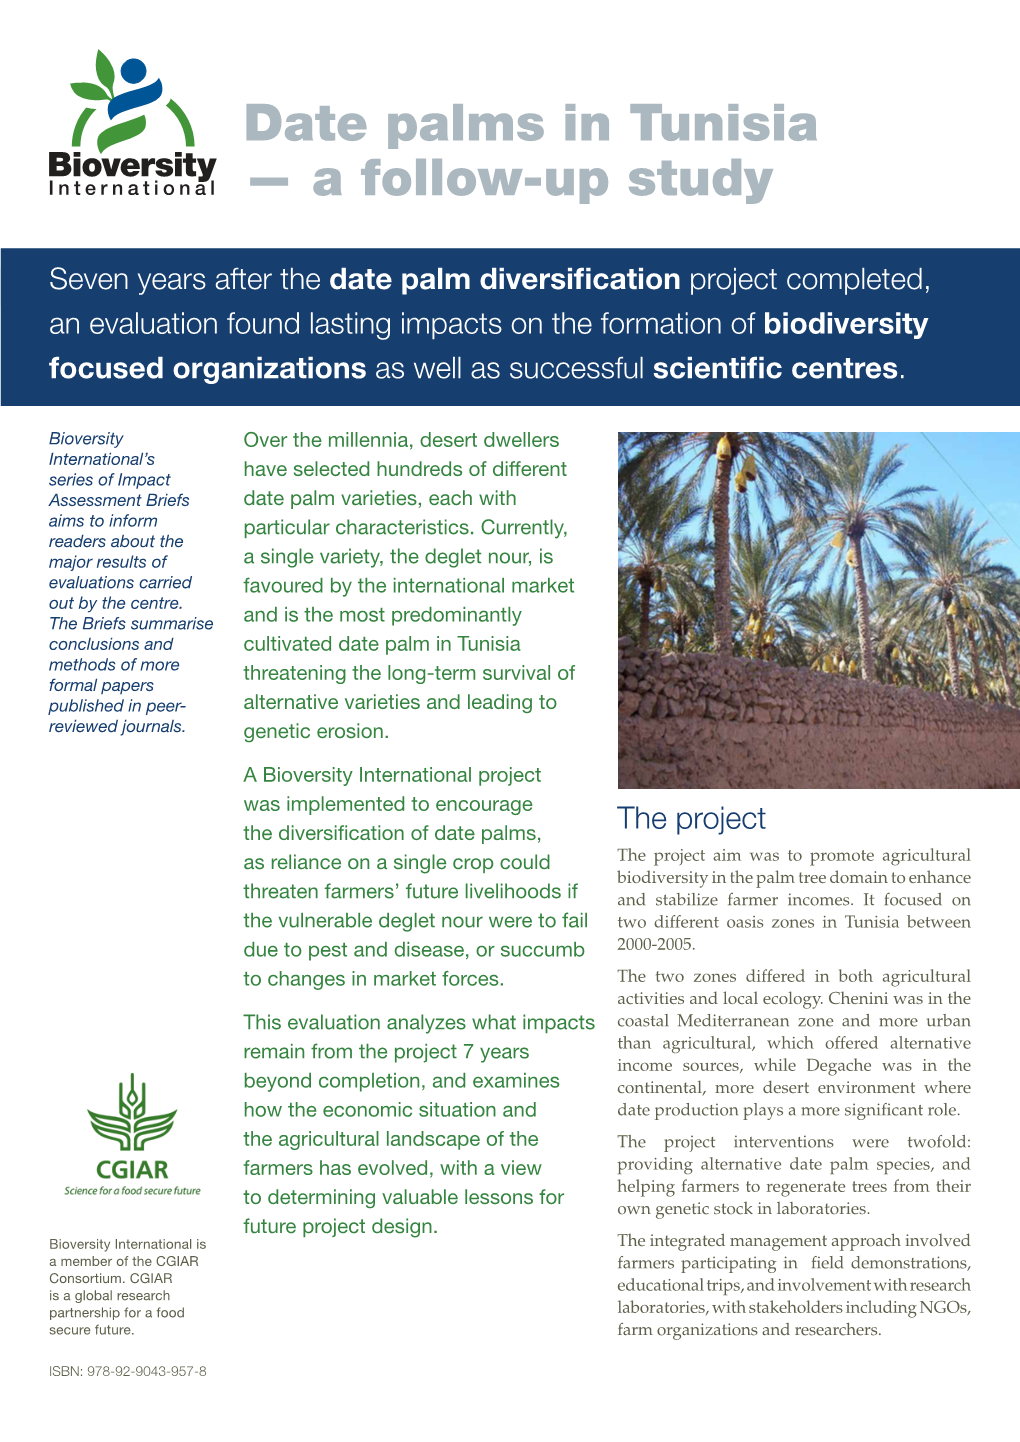 Date Palms in Tunisia — a Follow-Up Study